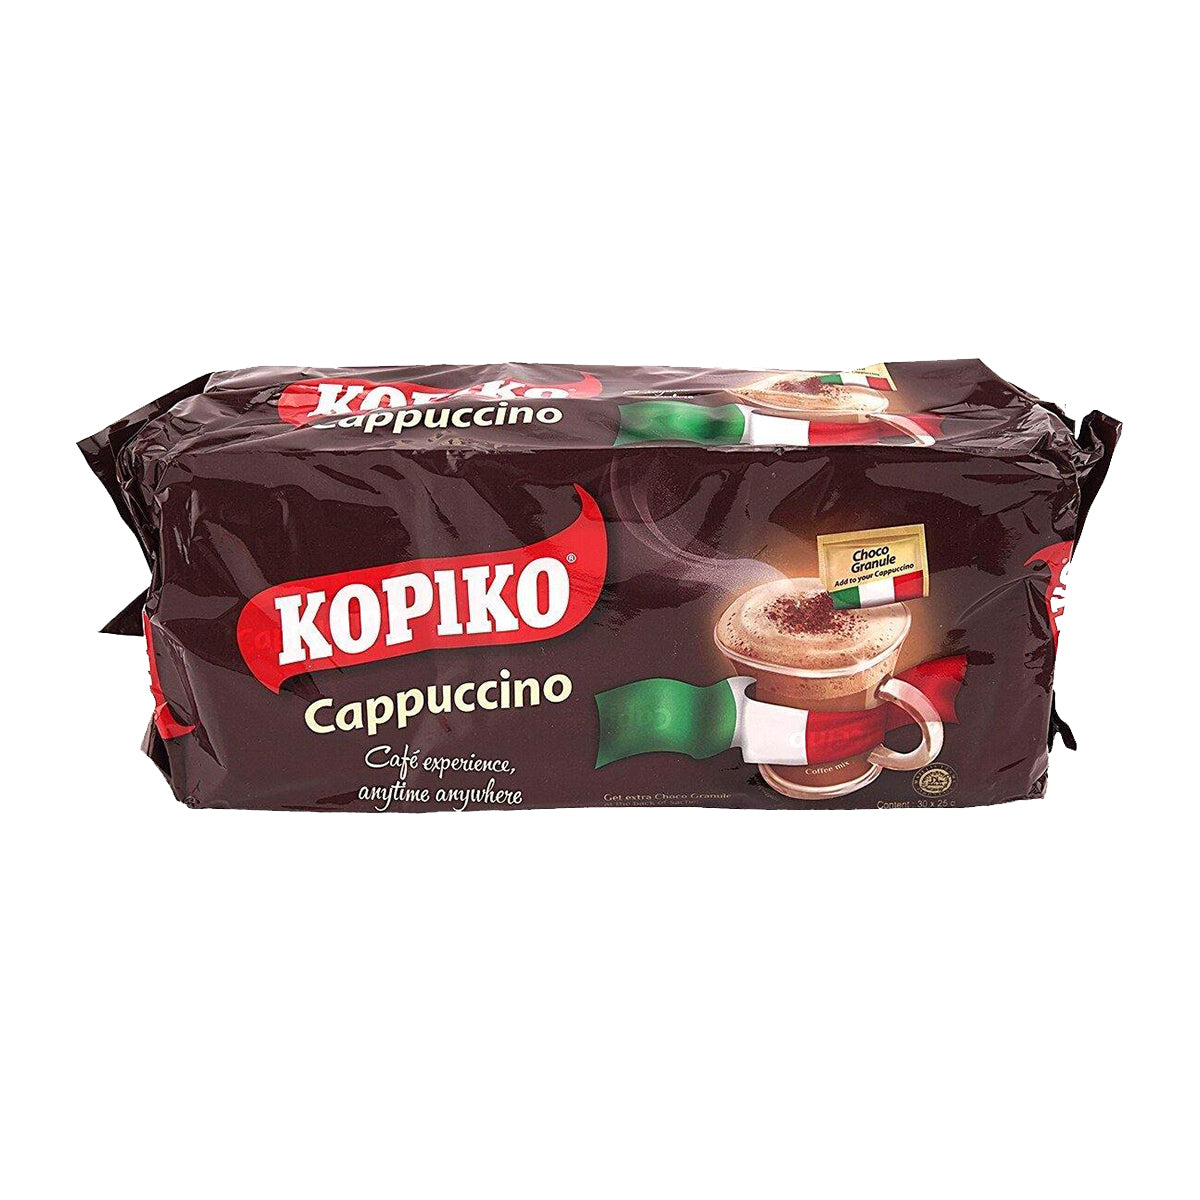 kopiko instant cappuccino coffee with choco granule - 30ct